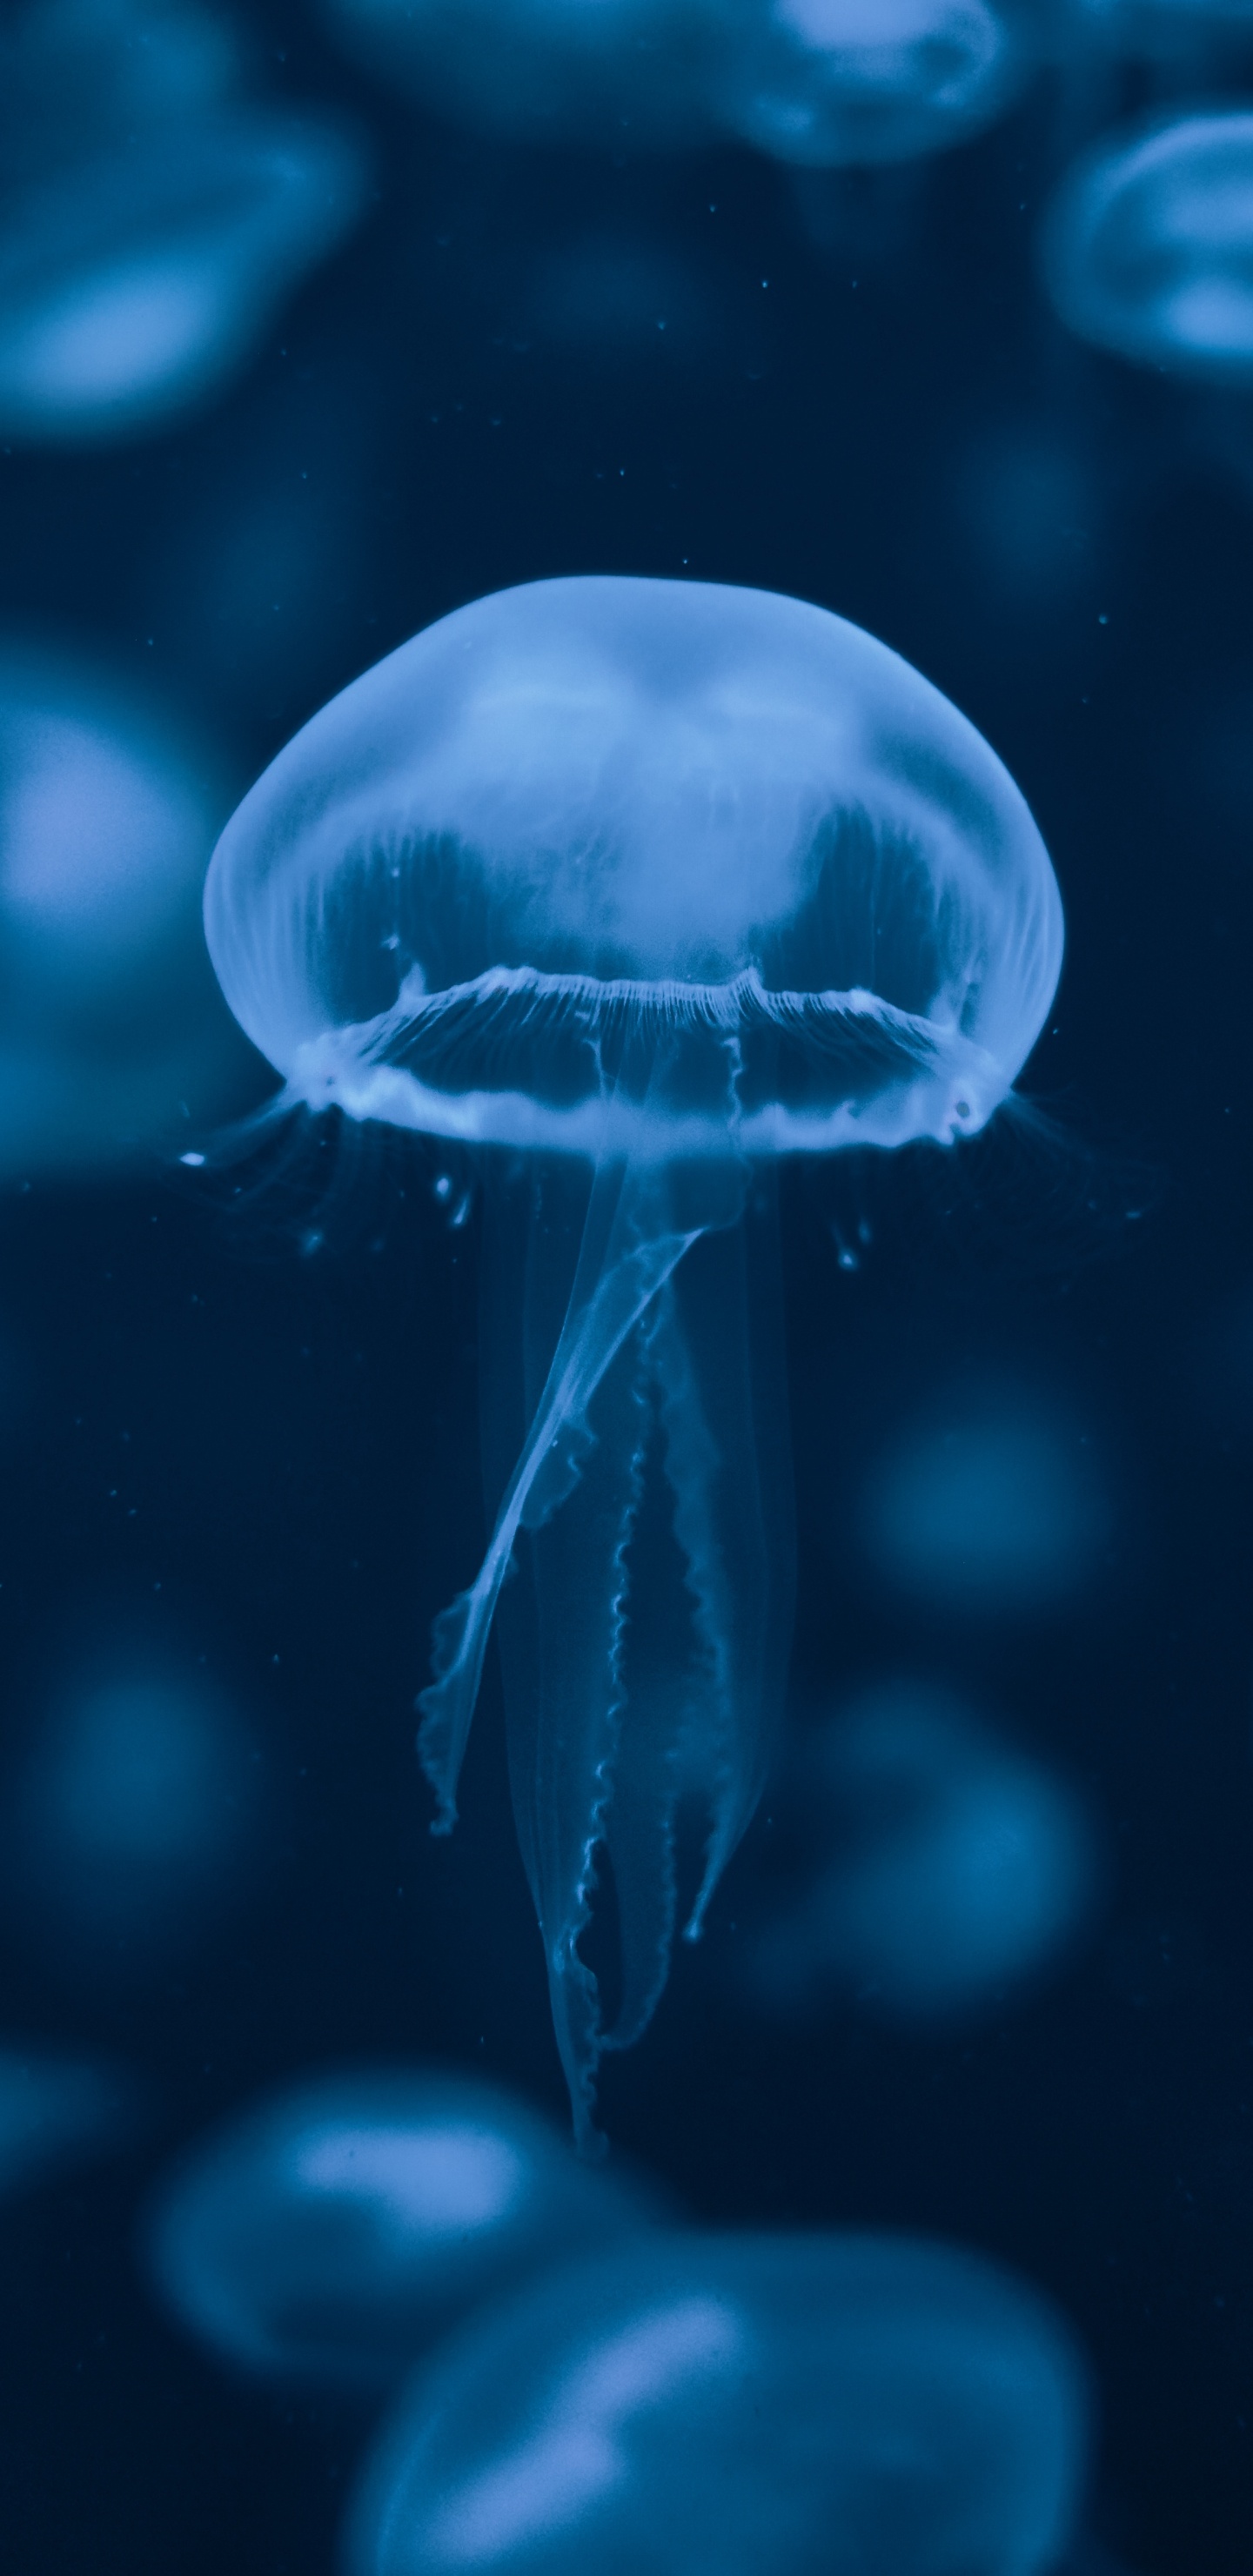 Blue and White Jellyfish Illustration. Wallpaper in 1440x2960 Resolution